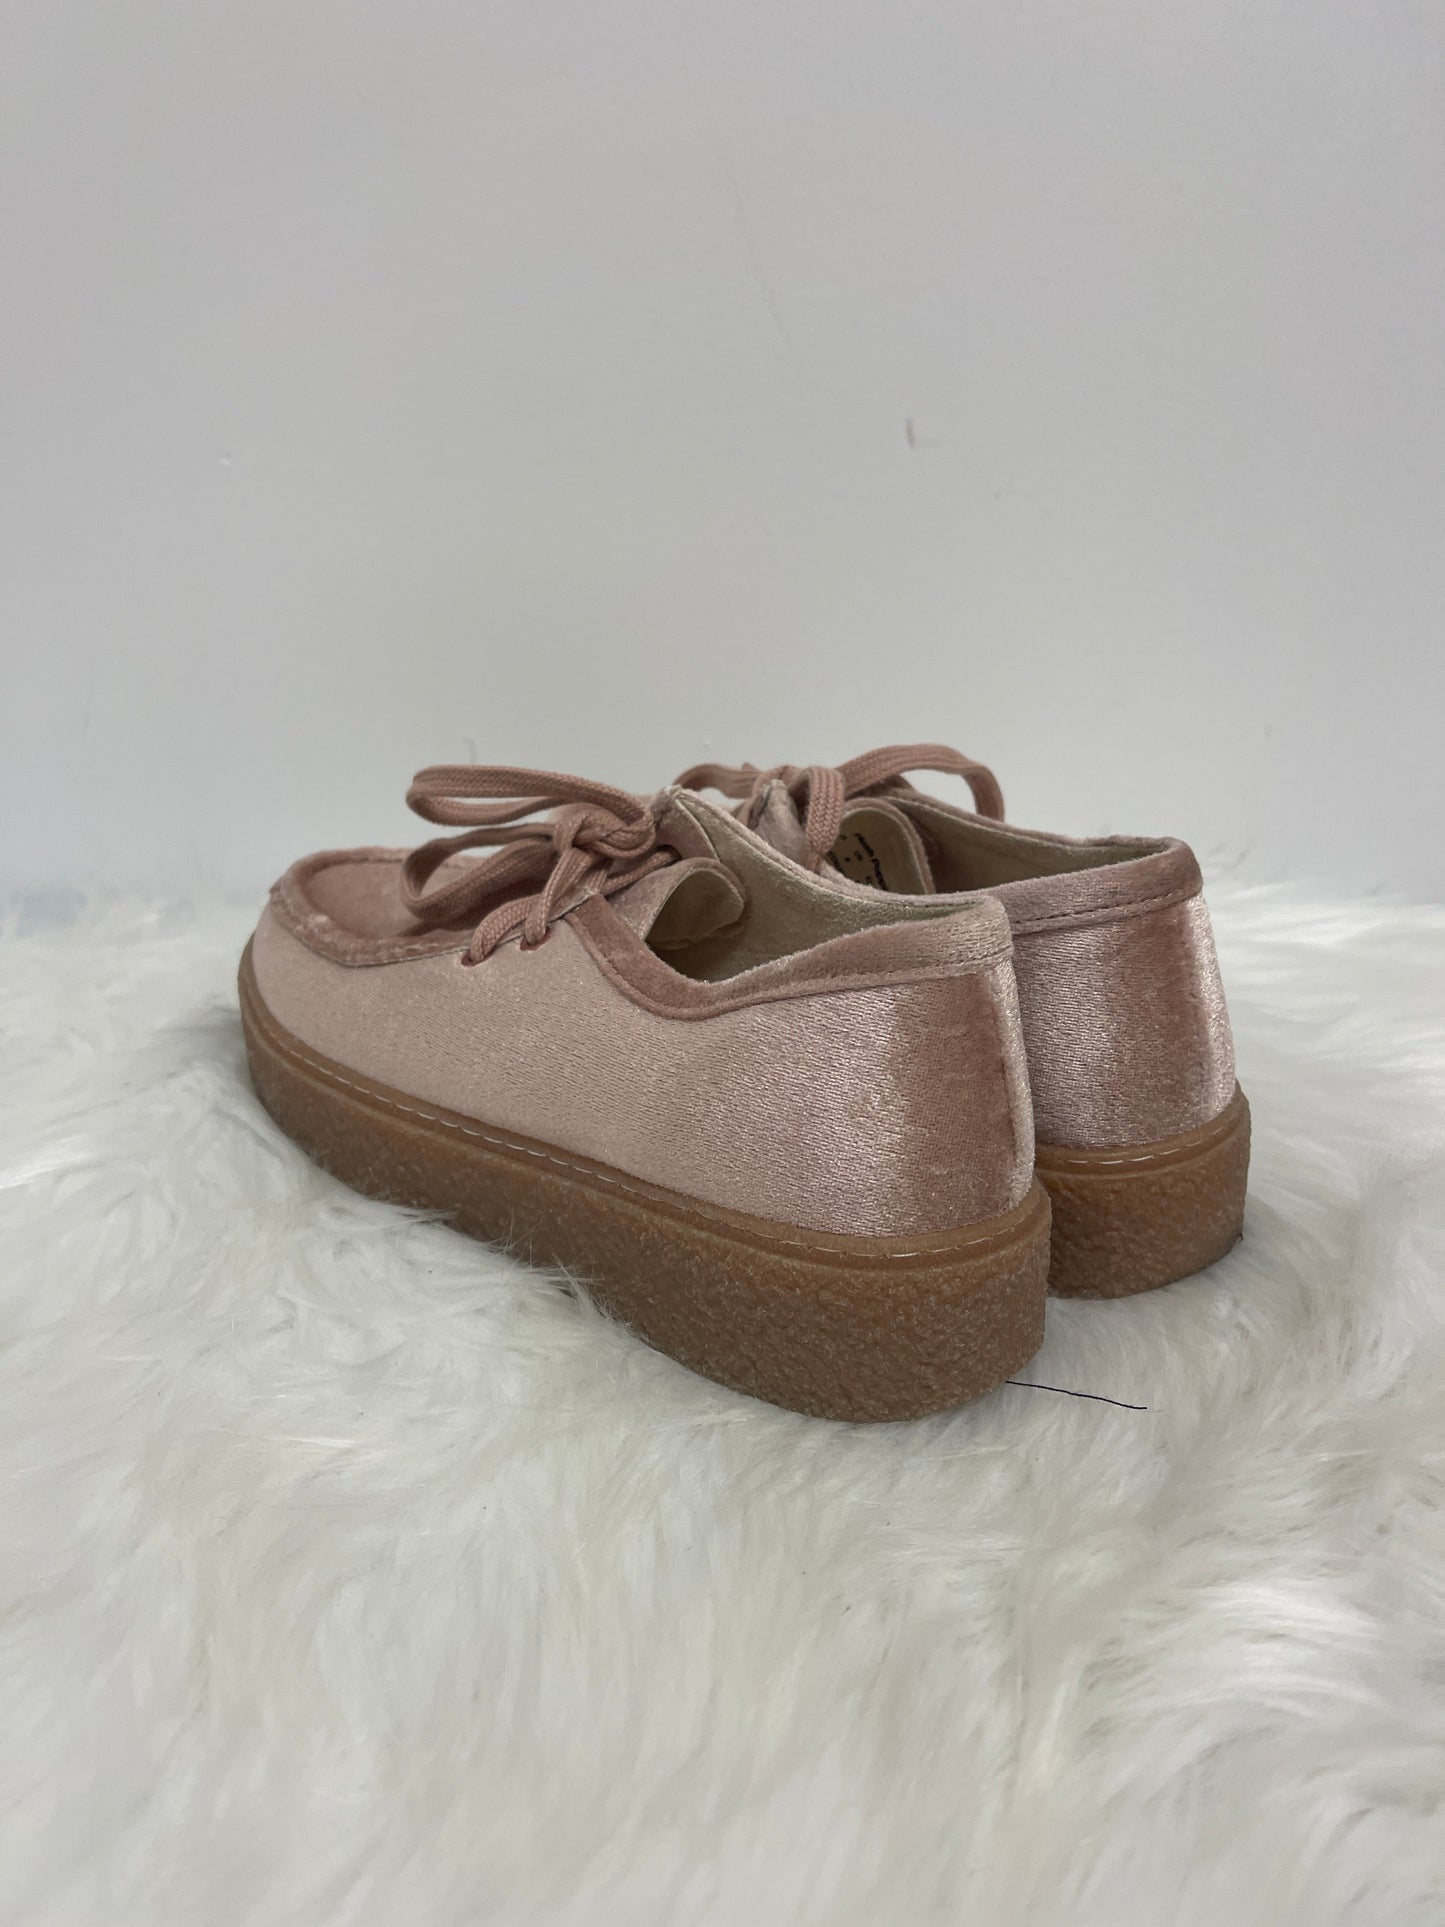 Shoes Flats Other By Hush Puppies  Size: 10